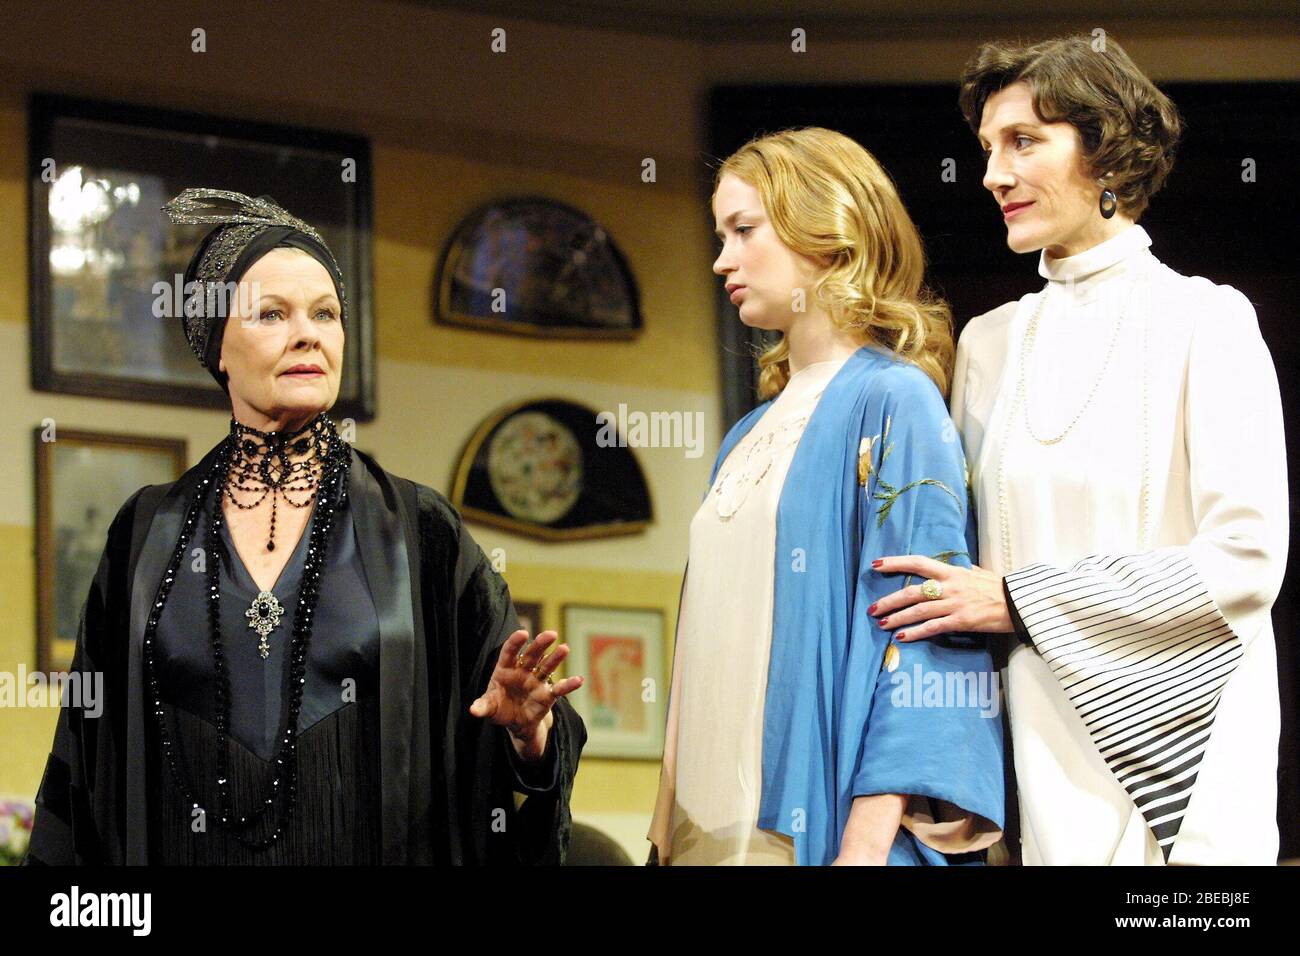 l-r: Judi Dench (Fanny Cavendish), Emily Blunt (Gwen Cavendish), Harriet Walter (Julie Cavendish) in THE ROYAL FAMILY by George S. Kaufman & Edna Ferber   at the Theatre Royal Haymarket, London in 2001 design: Anthony Ward  lighting: Jon Buswell  director: Peter Hall Stock Photo